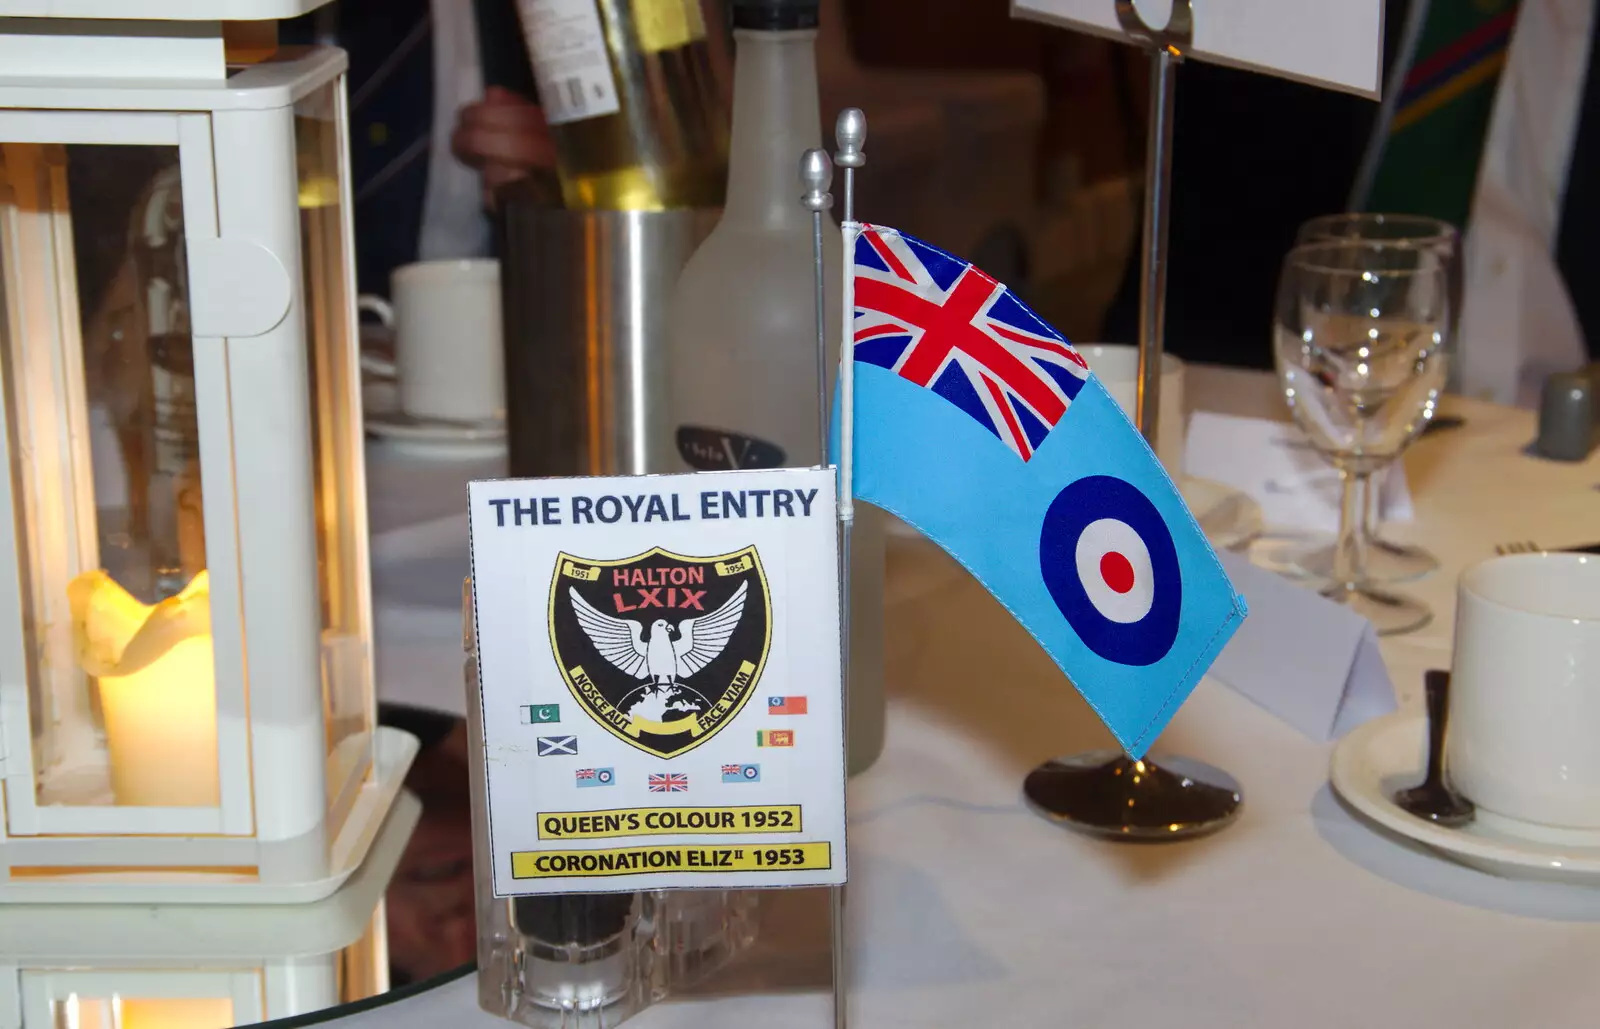 The Royal Entry badge and RAF ensign, from Kenilworth Castle and the 69th Entry Reunion Dinner, Stratford, Warwickshire - 14th September 2019